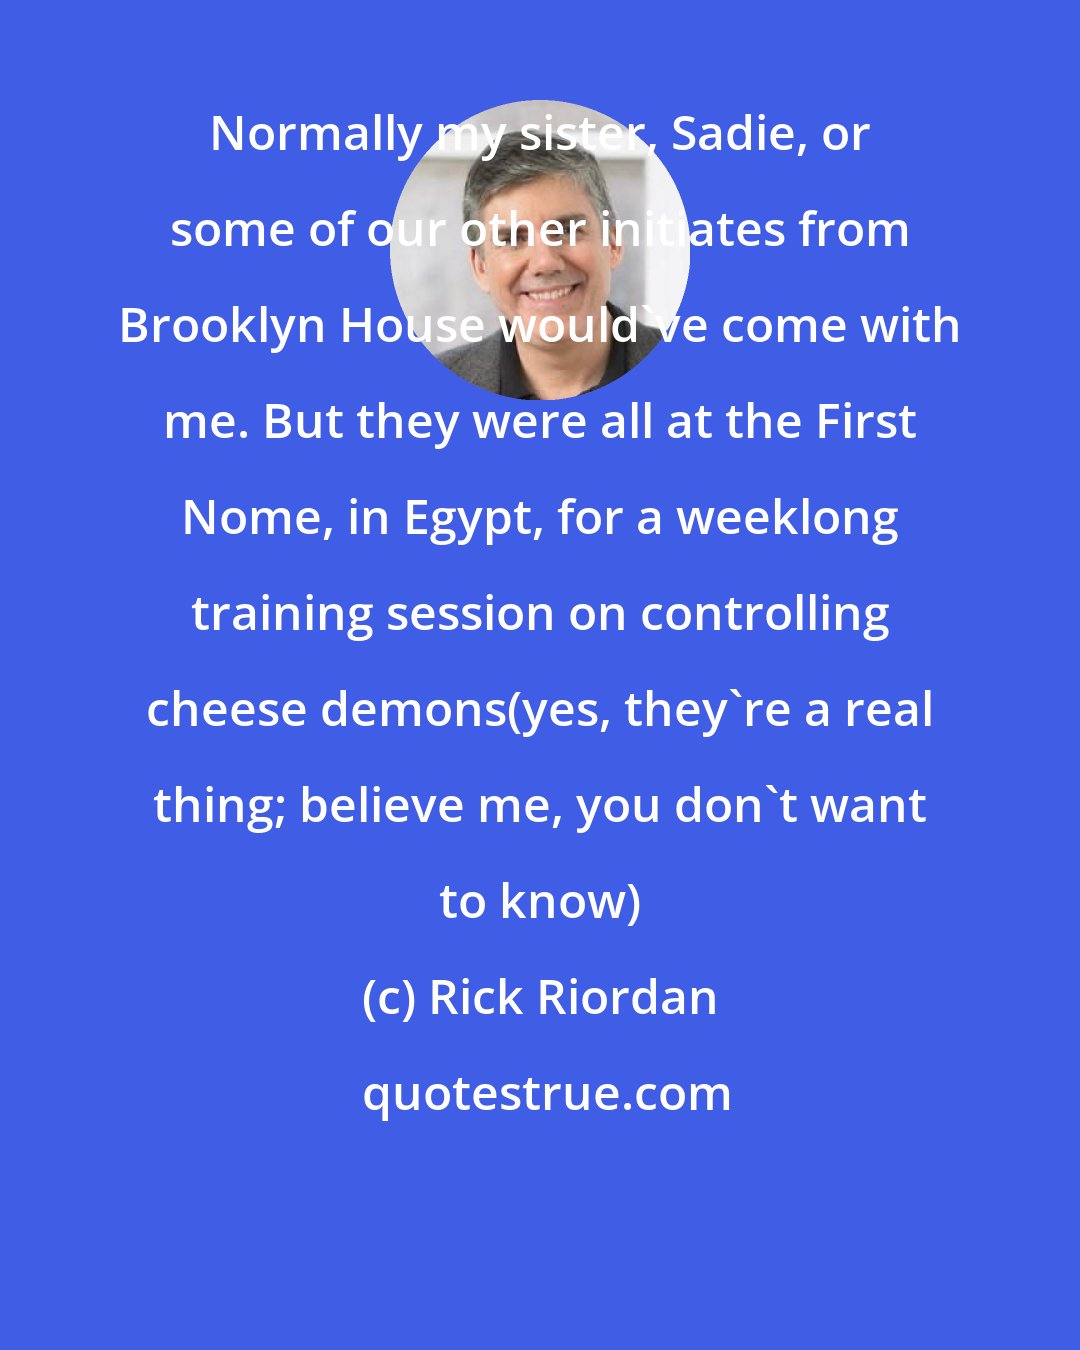 Rick Riordan: Normally my sister, Sadie, or some of our other initiates from Brooklyn House would've come with me. But they were all at the First Nome, in Egypt, for a weeklong training session on controlling cheese demons(yes, they're a real thing; believe me, you don't want to know)